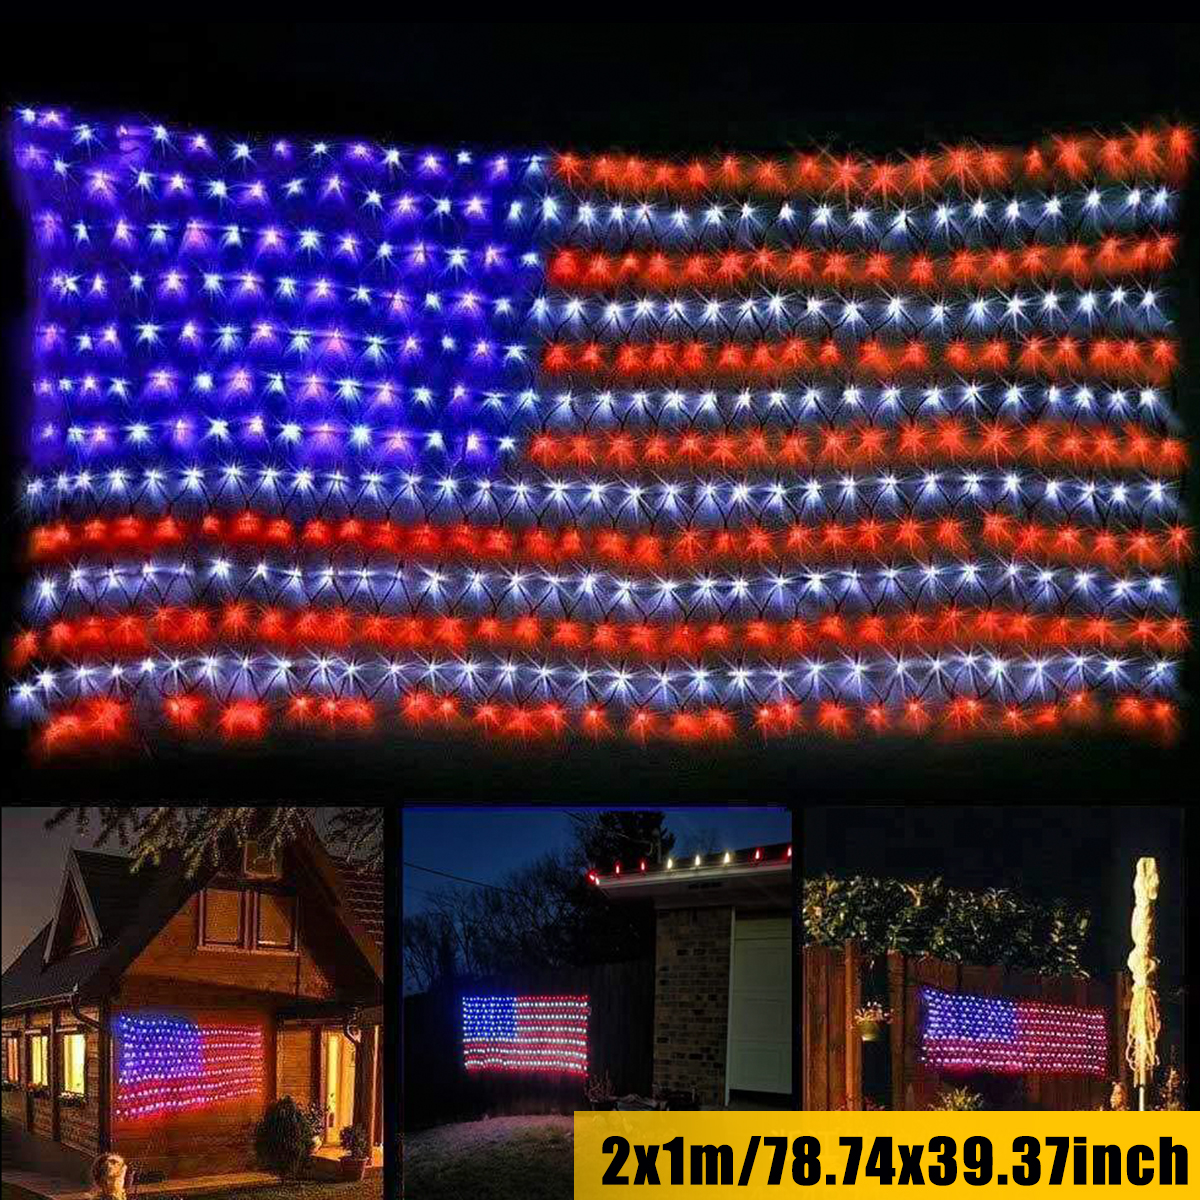 30V-420LEDs-American-Flag-Net-Lamp-Outdoor-Waterproof-String-Light-Yard-Home-Holiday-Decoration-US-P-1732818-2